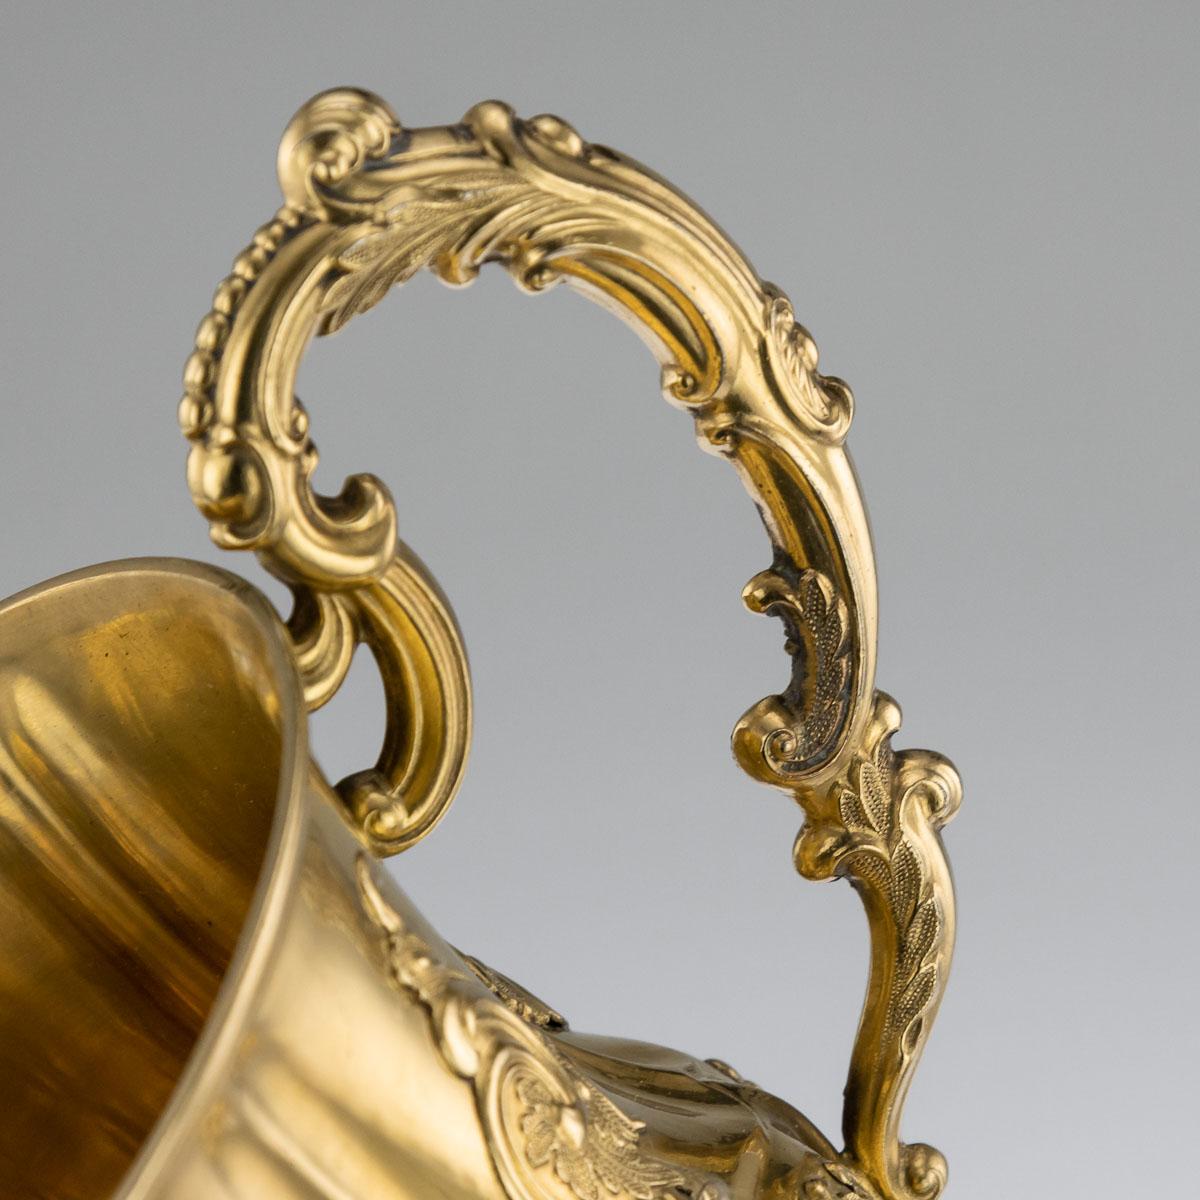 19th Century Russian Solid Silver-Gilt Cup and Cover, St-Petersburg, circa 1842 6